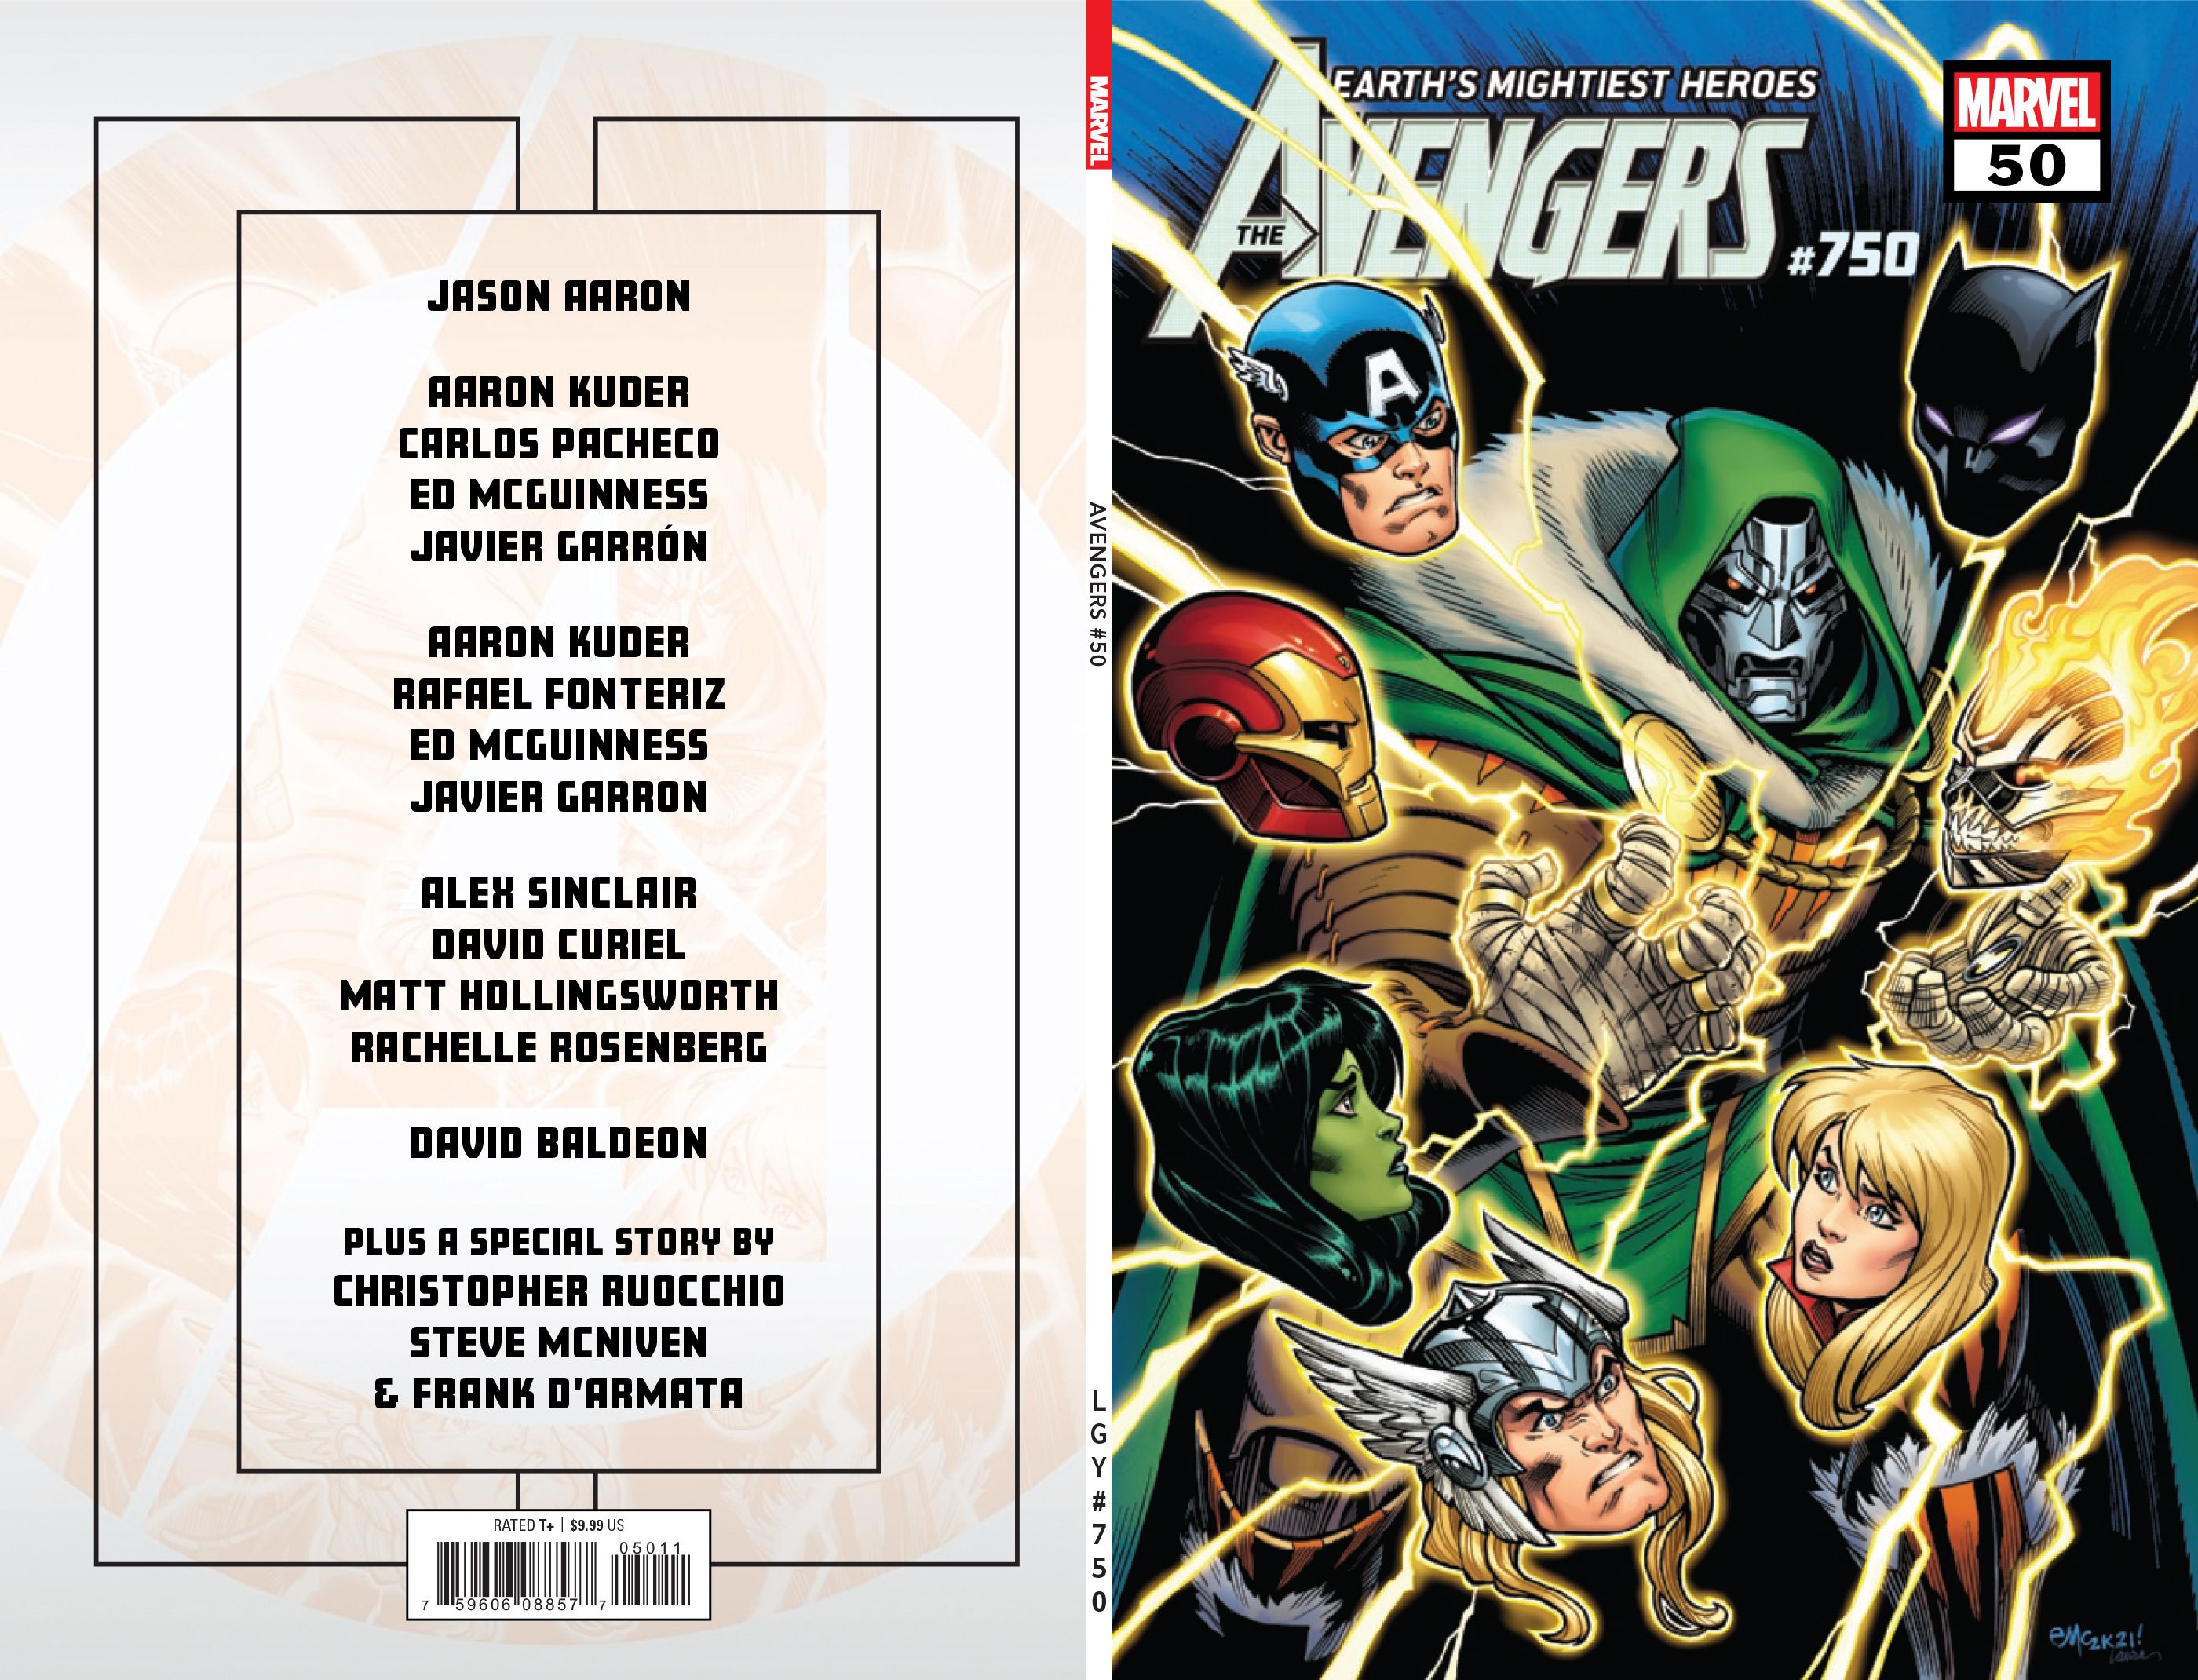 Doctor Doom and the heads of Avengers grace the cover of Avengers #750.